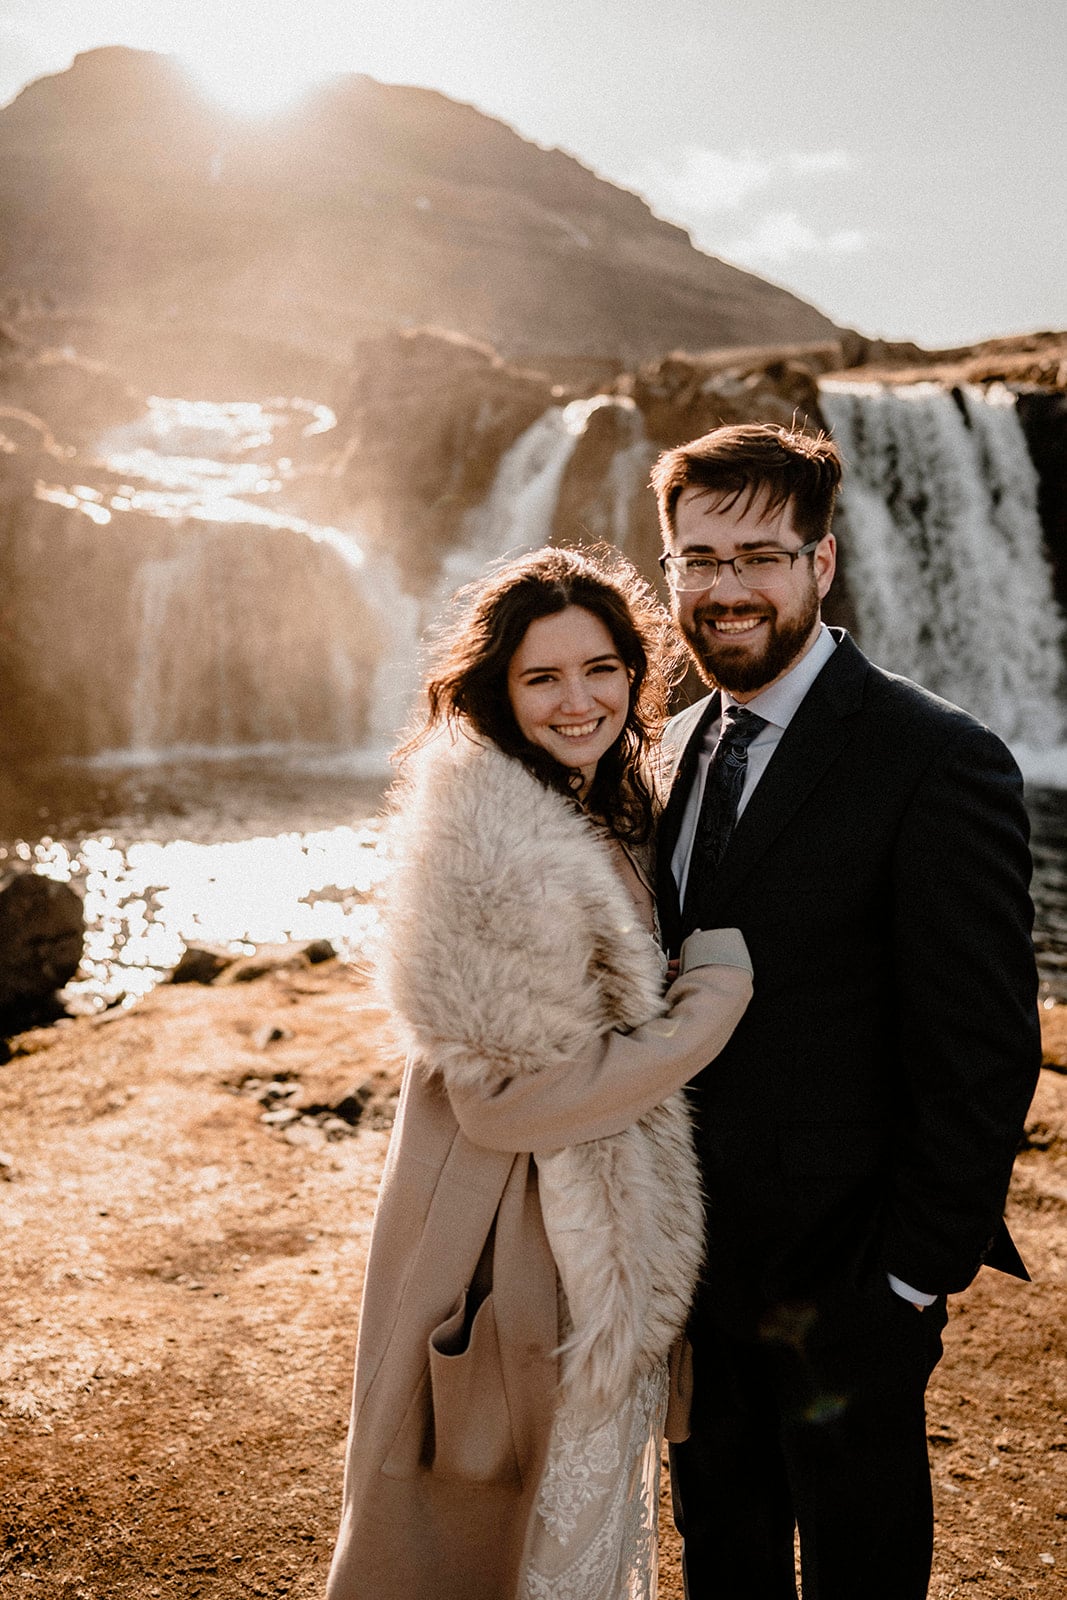 Windswept Happiness: Bride and Groom's Blissful Moment in Western Iceland